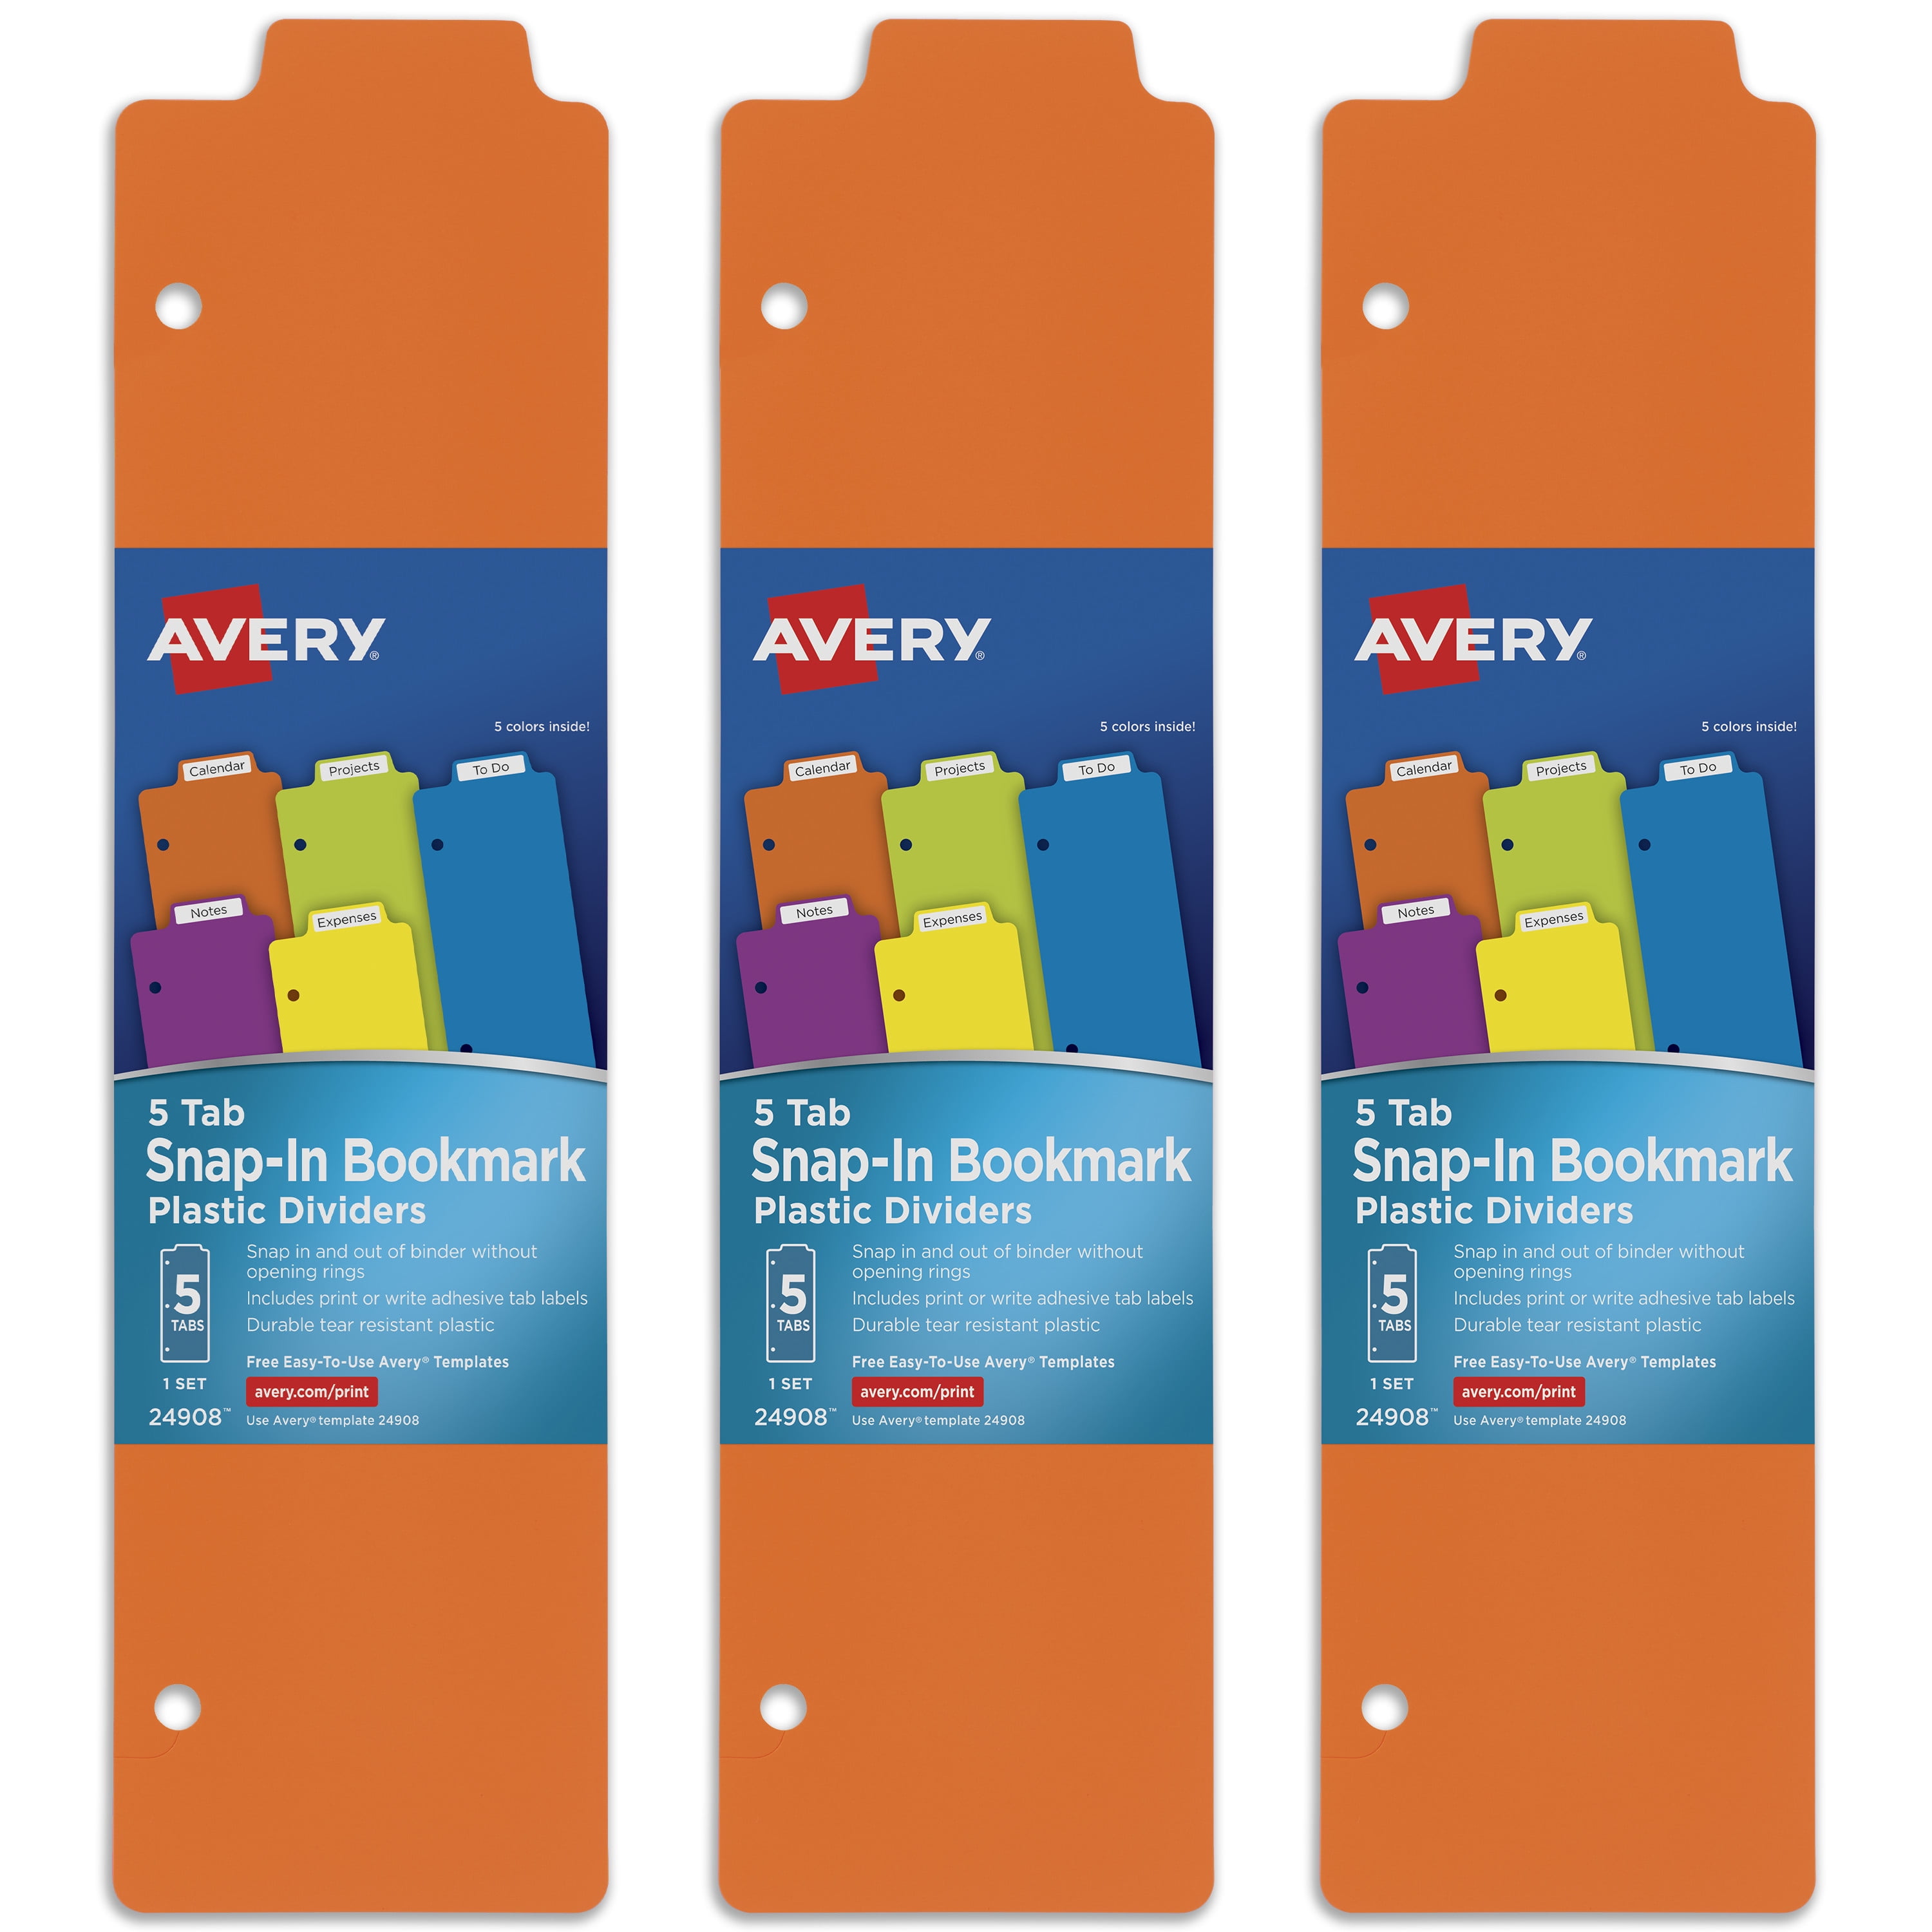 Avery Products, Labels, Binders, Dividers & More